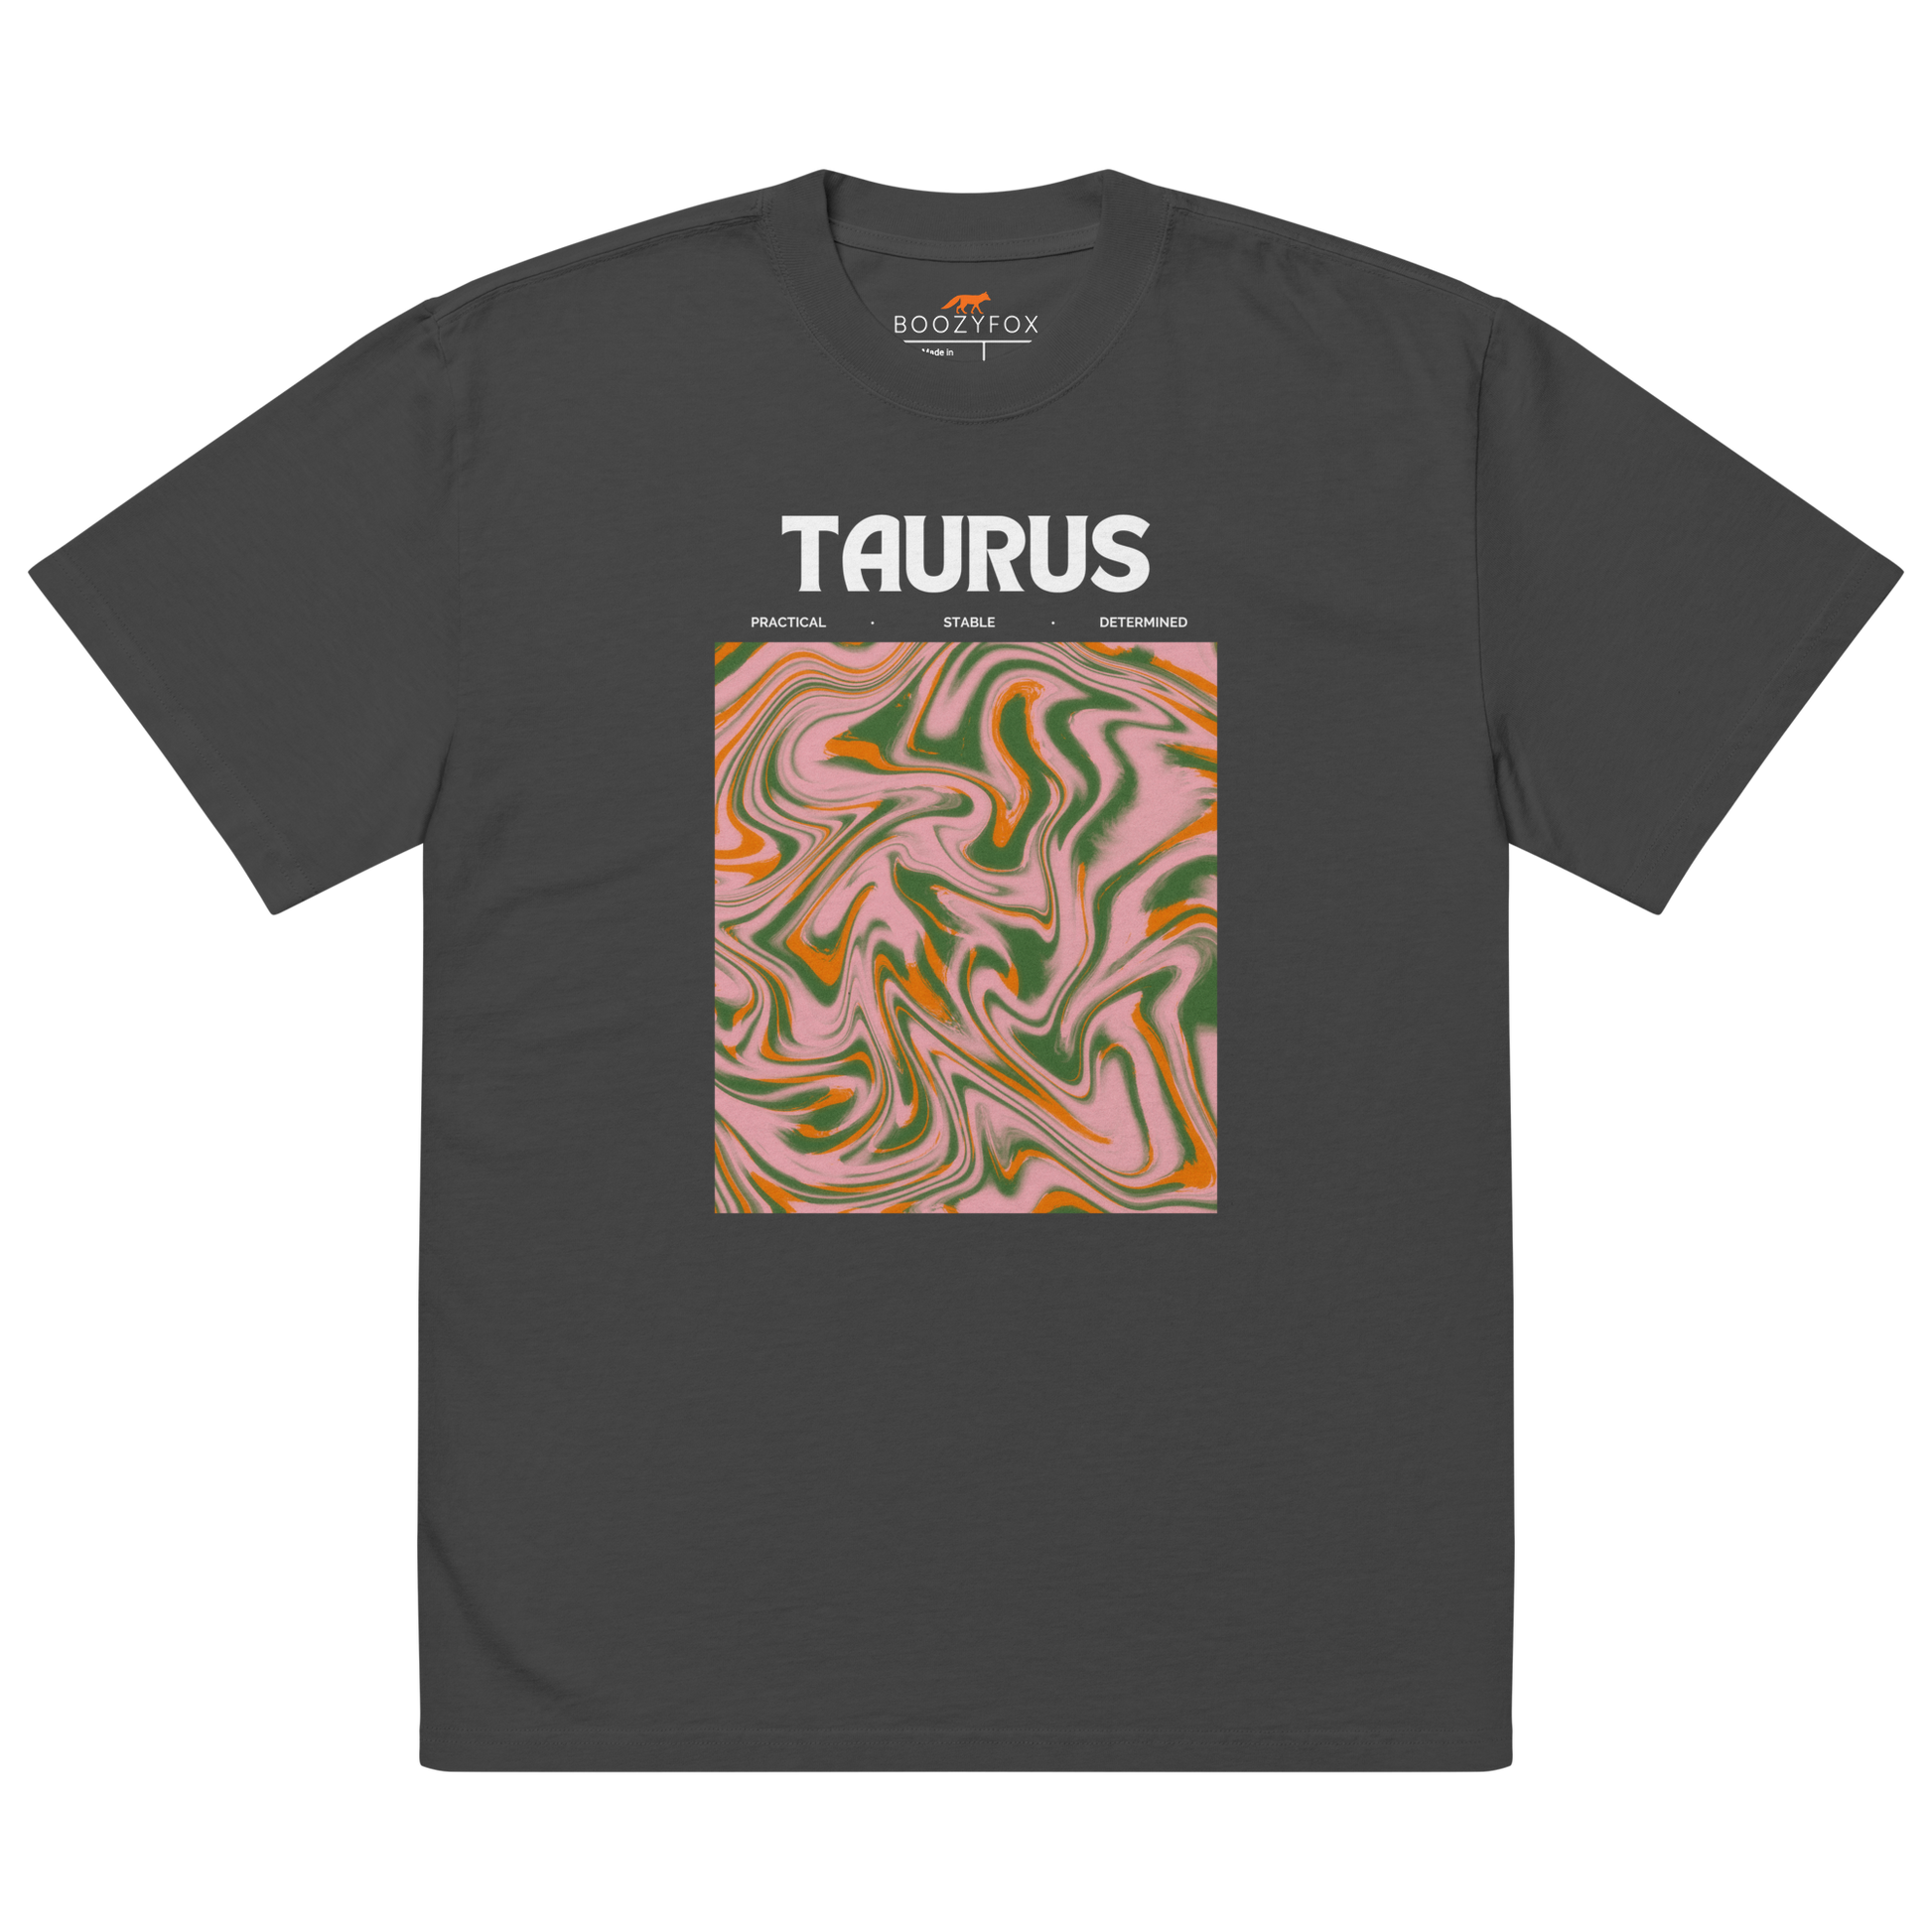 Faded Black Taurus Oversized T-Shirt featuring an Abstract Taurus Star Sign graphic on the chest - Cool Graphic Zodiac Oversized Tees - Boozy Fox